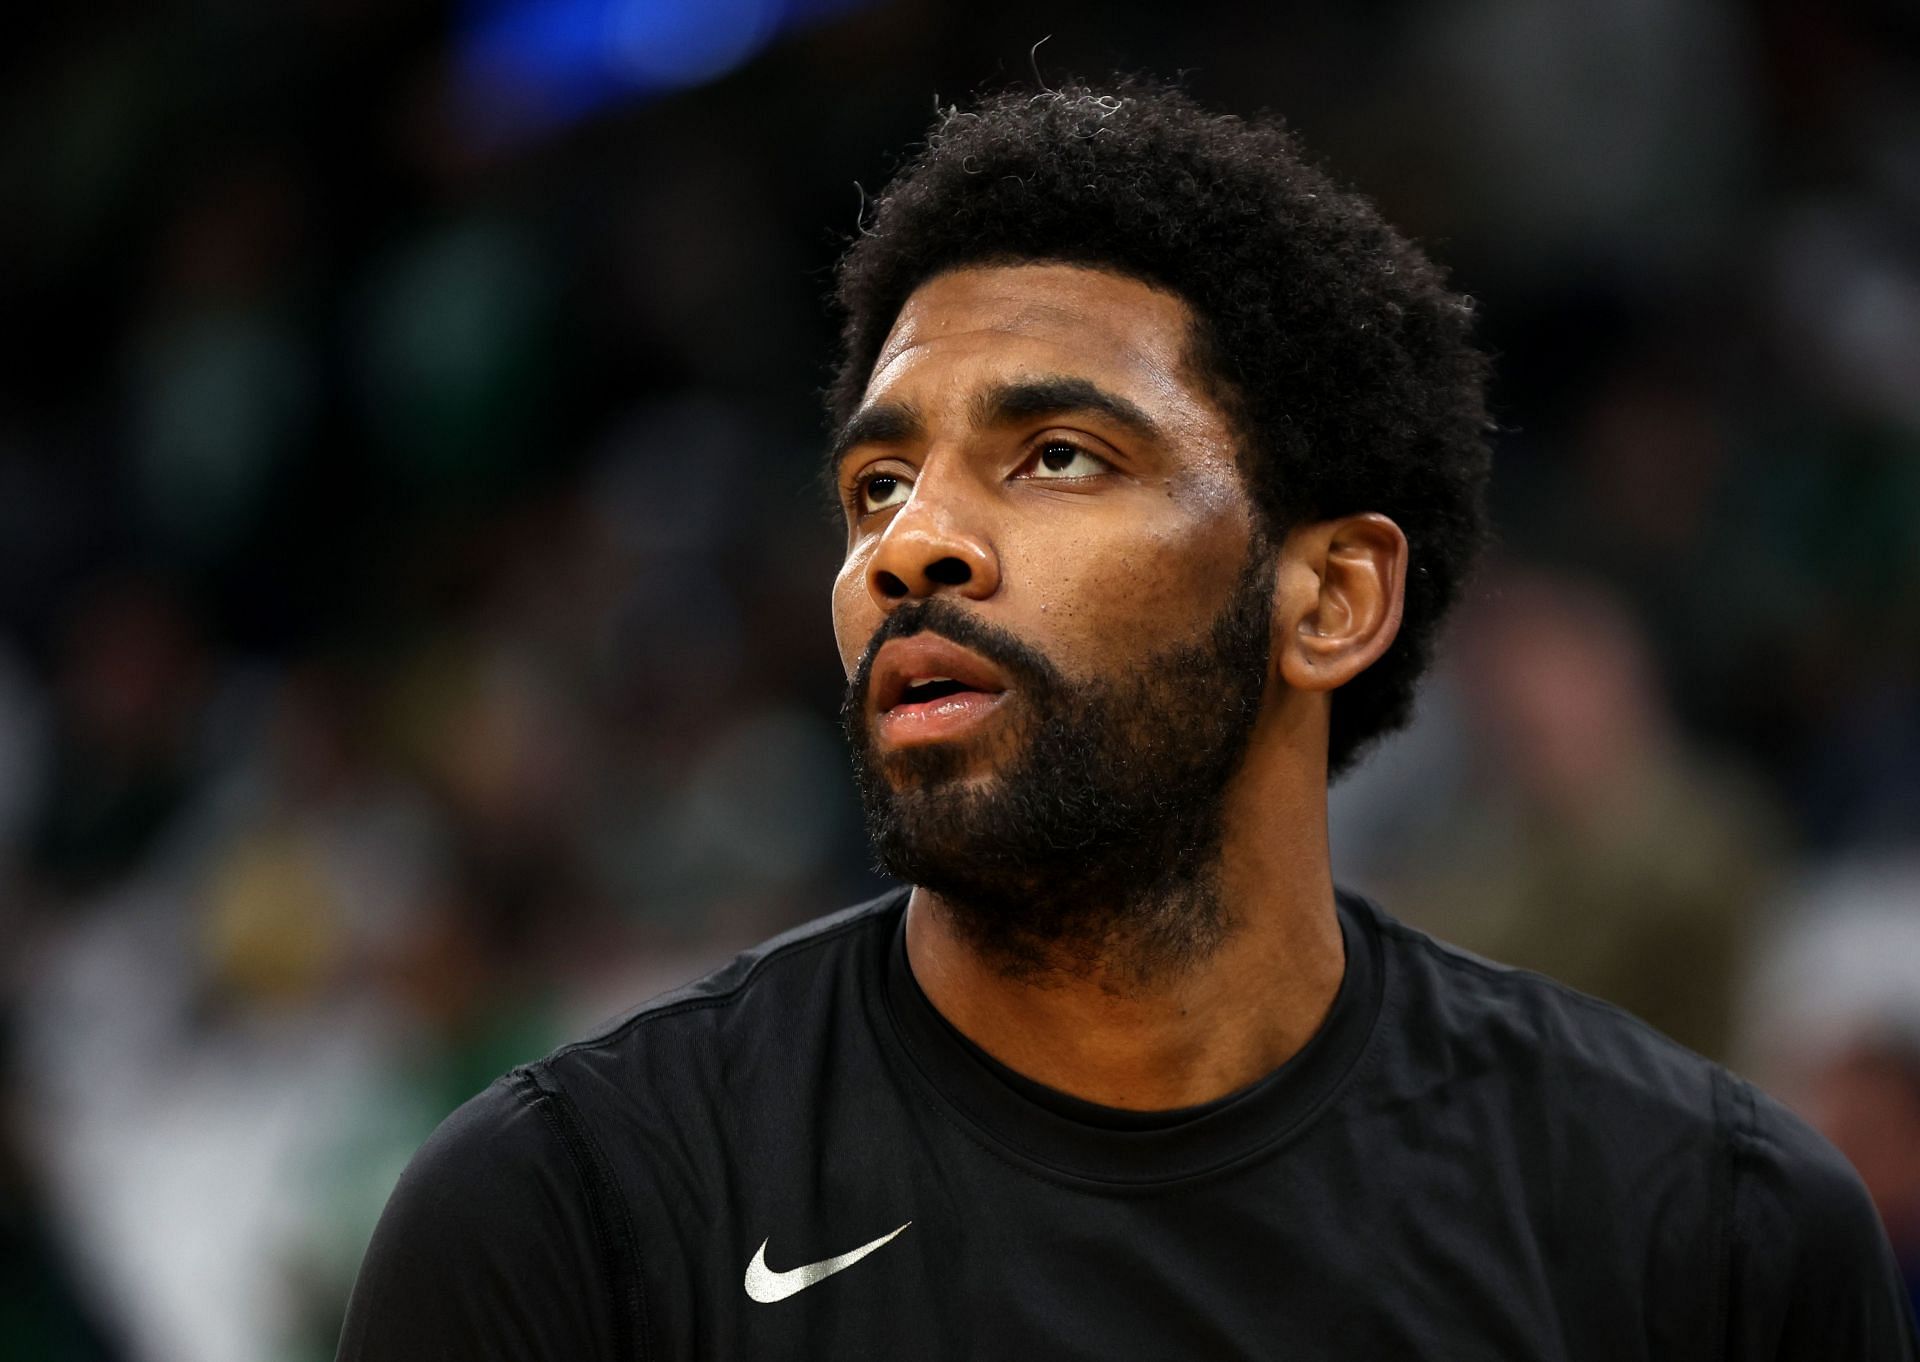 Kyrie Irving has featured heavily in trade rumours this offseason